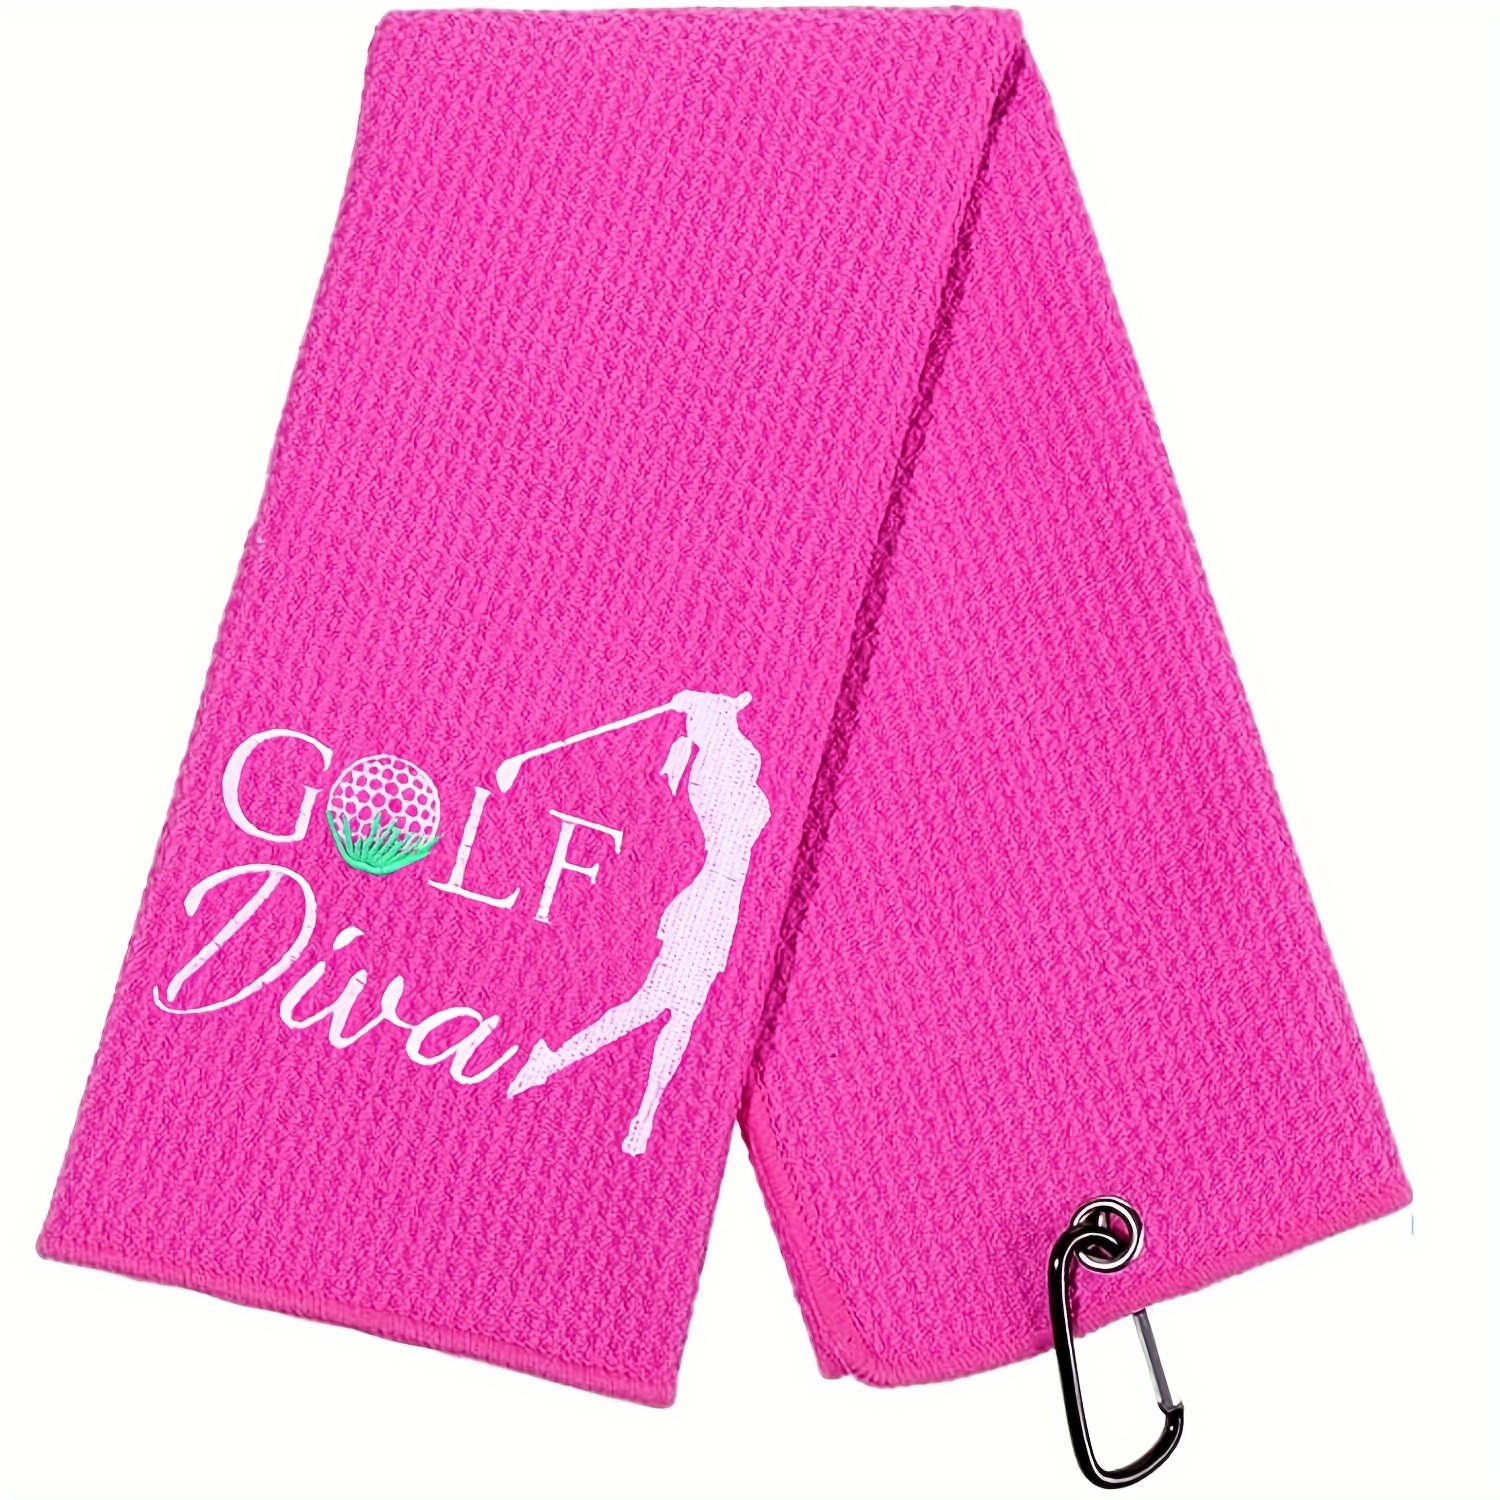 

Funny Golf Towel, Retirement Gifts For Women Golfer, Funny Golf Towel For Men & Women, Embroidered Golf Towels For Golf Bags With Clip, Pink Golf Towel